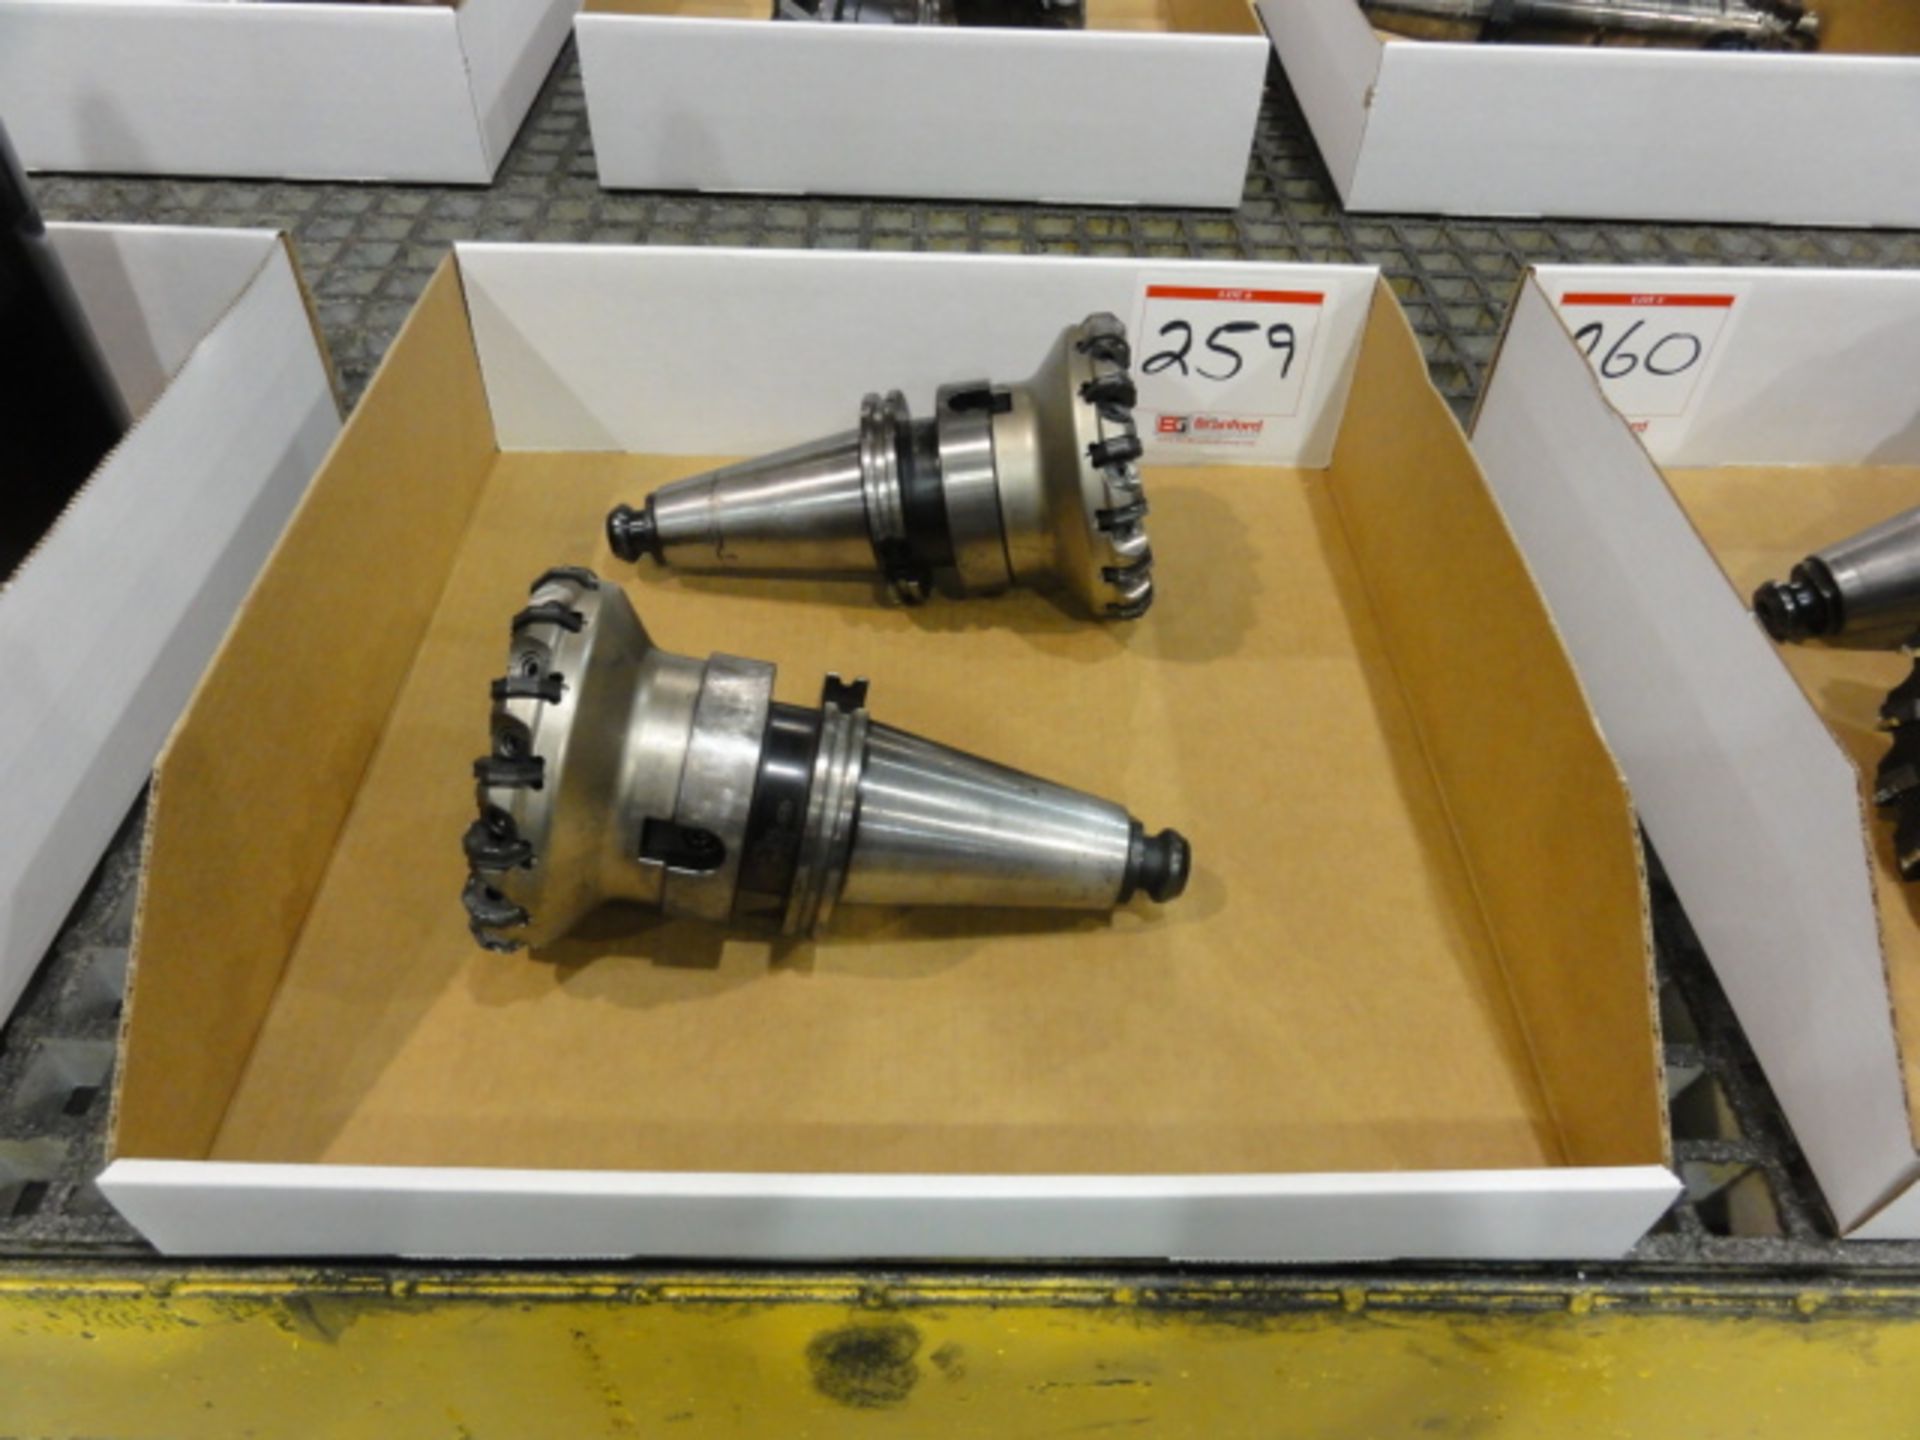 Lot of (2) CAT 50 Tool Holders w/ Seco Model R220.48-05.00-09-15 Carbide Insert Facing/Finishing